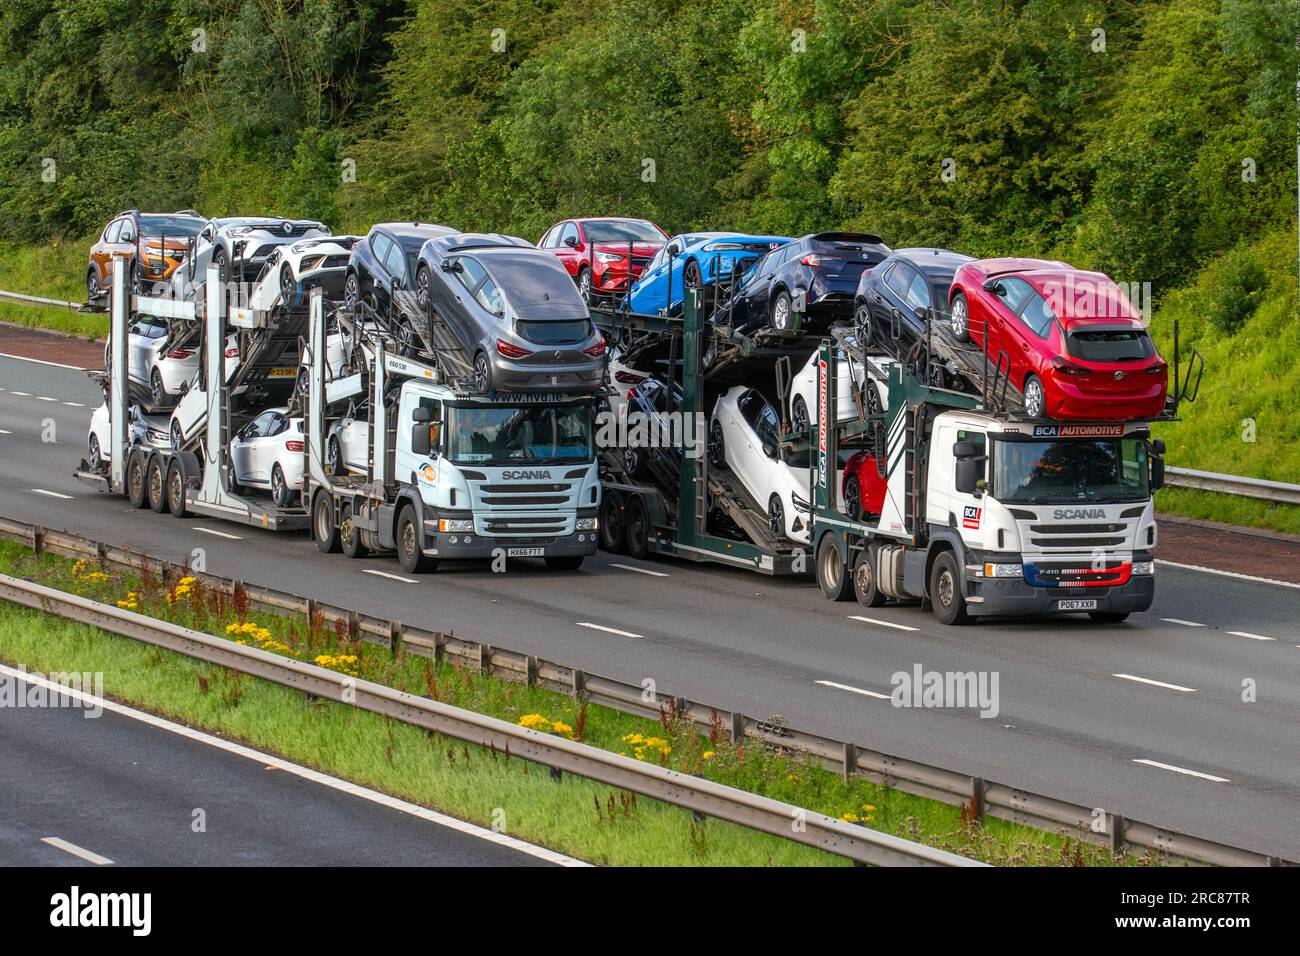 BCA British Car Auctions car transporter, Lorries & Trucks, shipping freight, heavy haulage, lorry logistics, collection and deliveries, Scania delivery transport vehicles on the M6, Manchester, UK Stock Photo